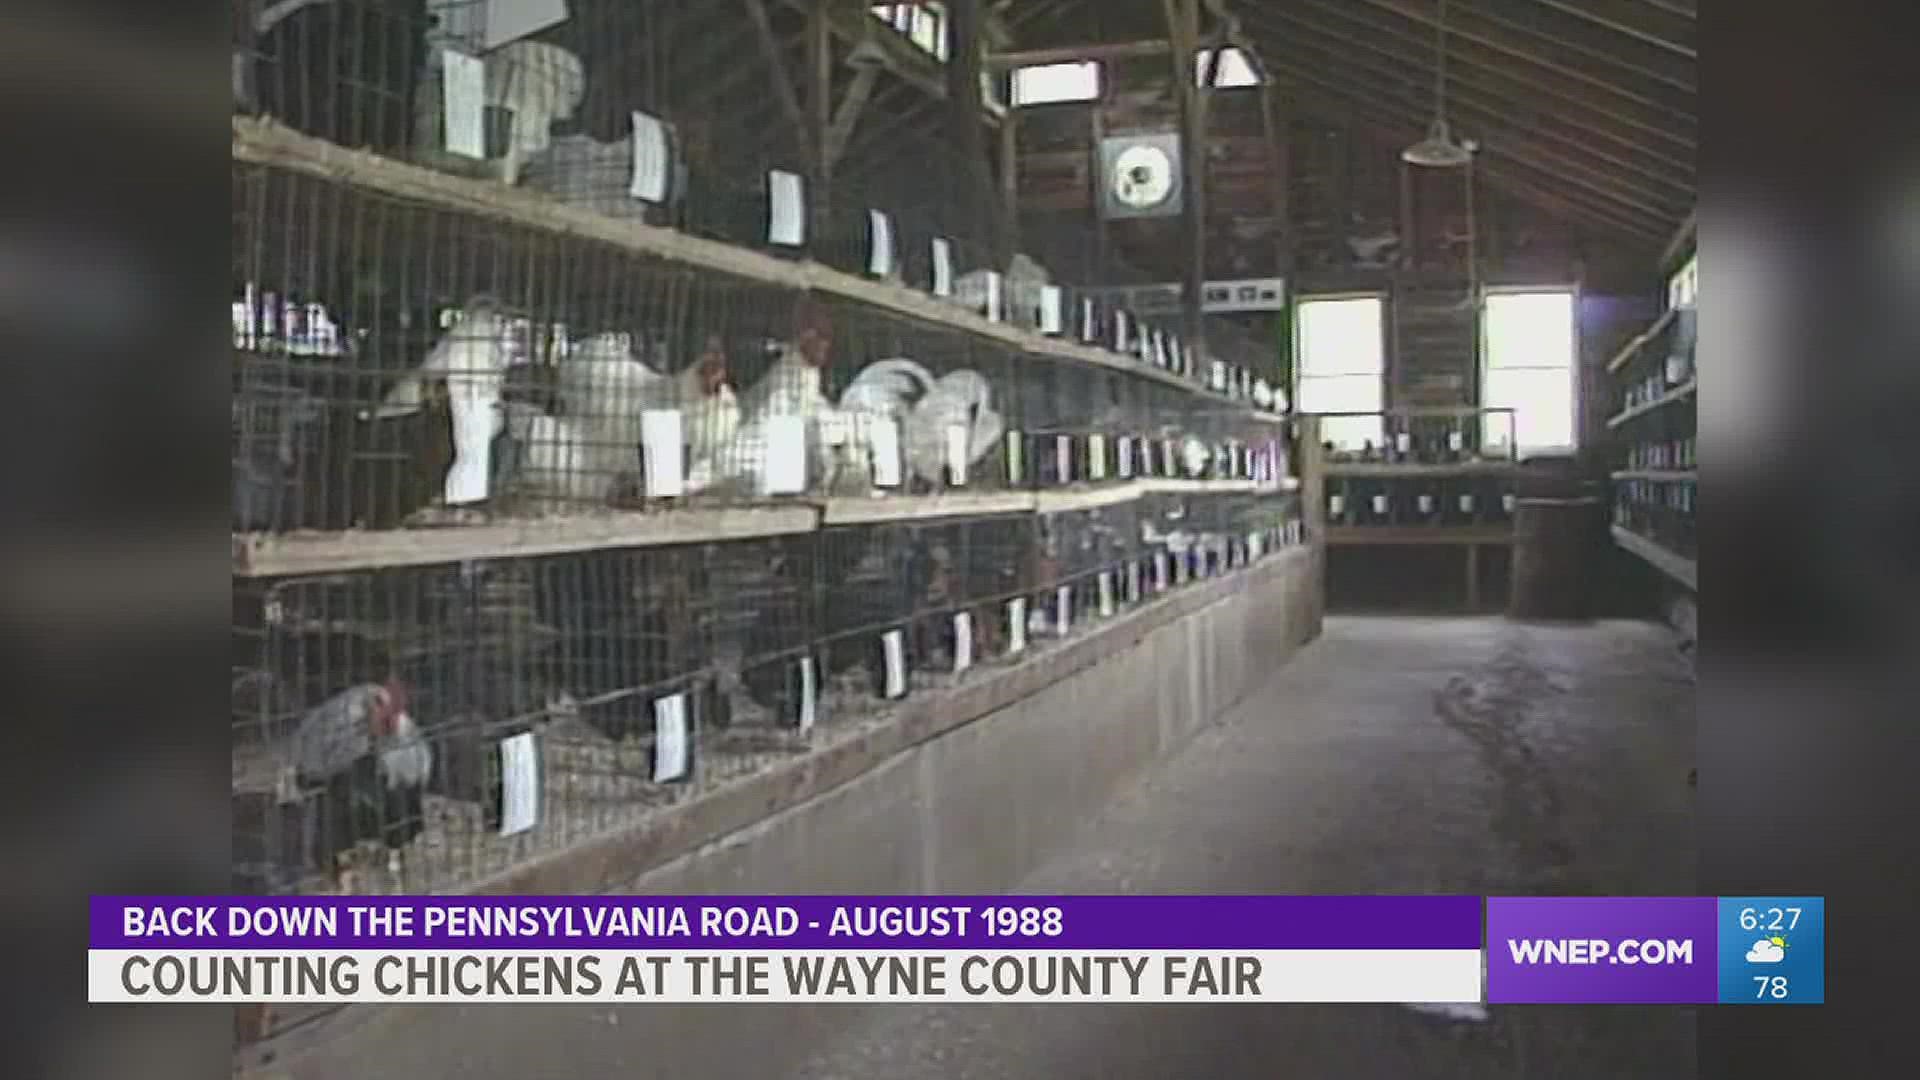 Mike shows us some of the featured fowl at the Wayne County Fair back in 1988.